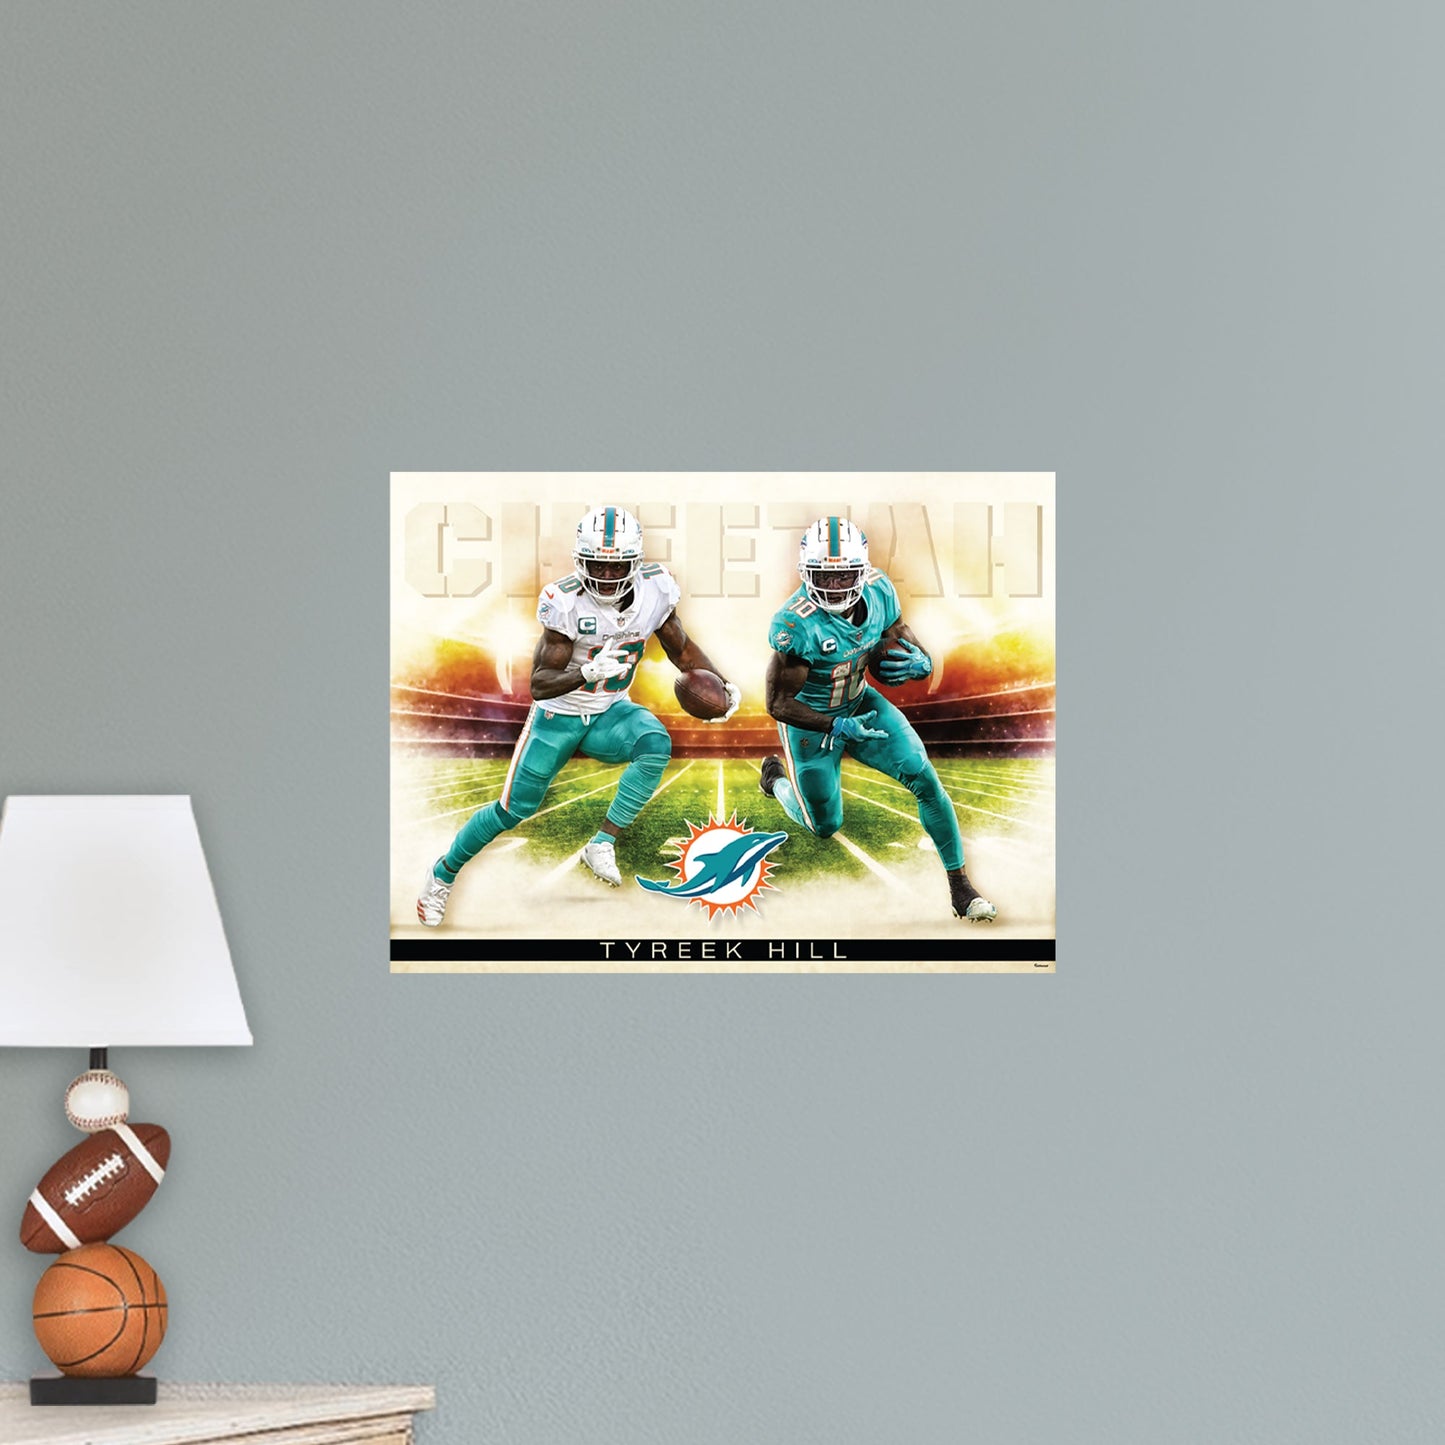 Miami Dolphins: Tyreek Hill Icon Poster - Officially Licensed NFL Removable Adhesive Decal